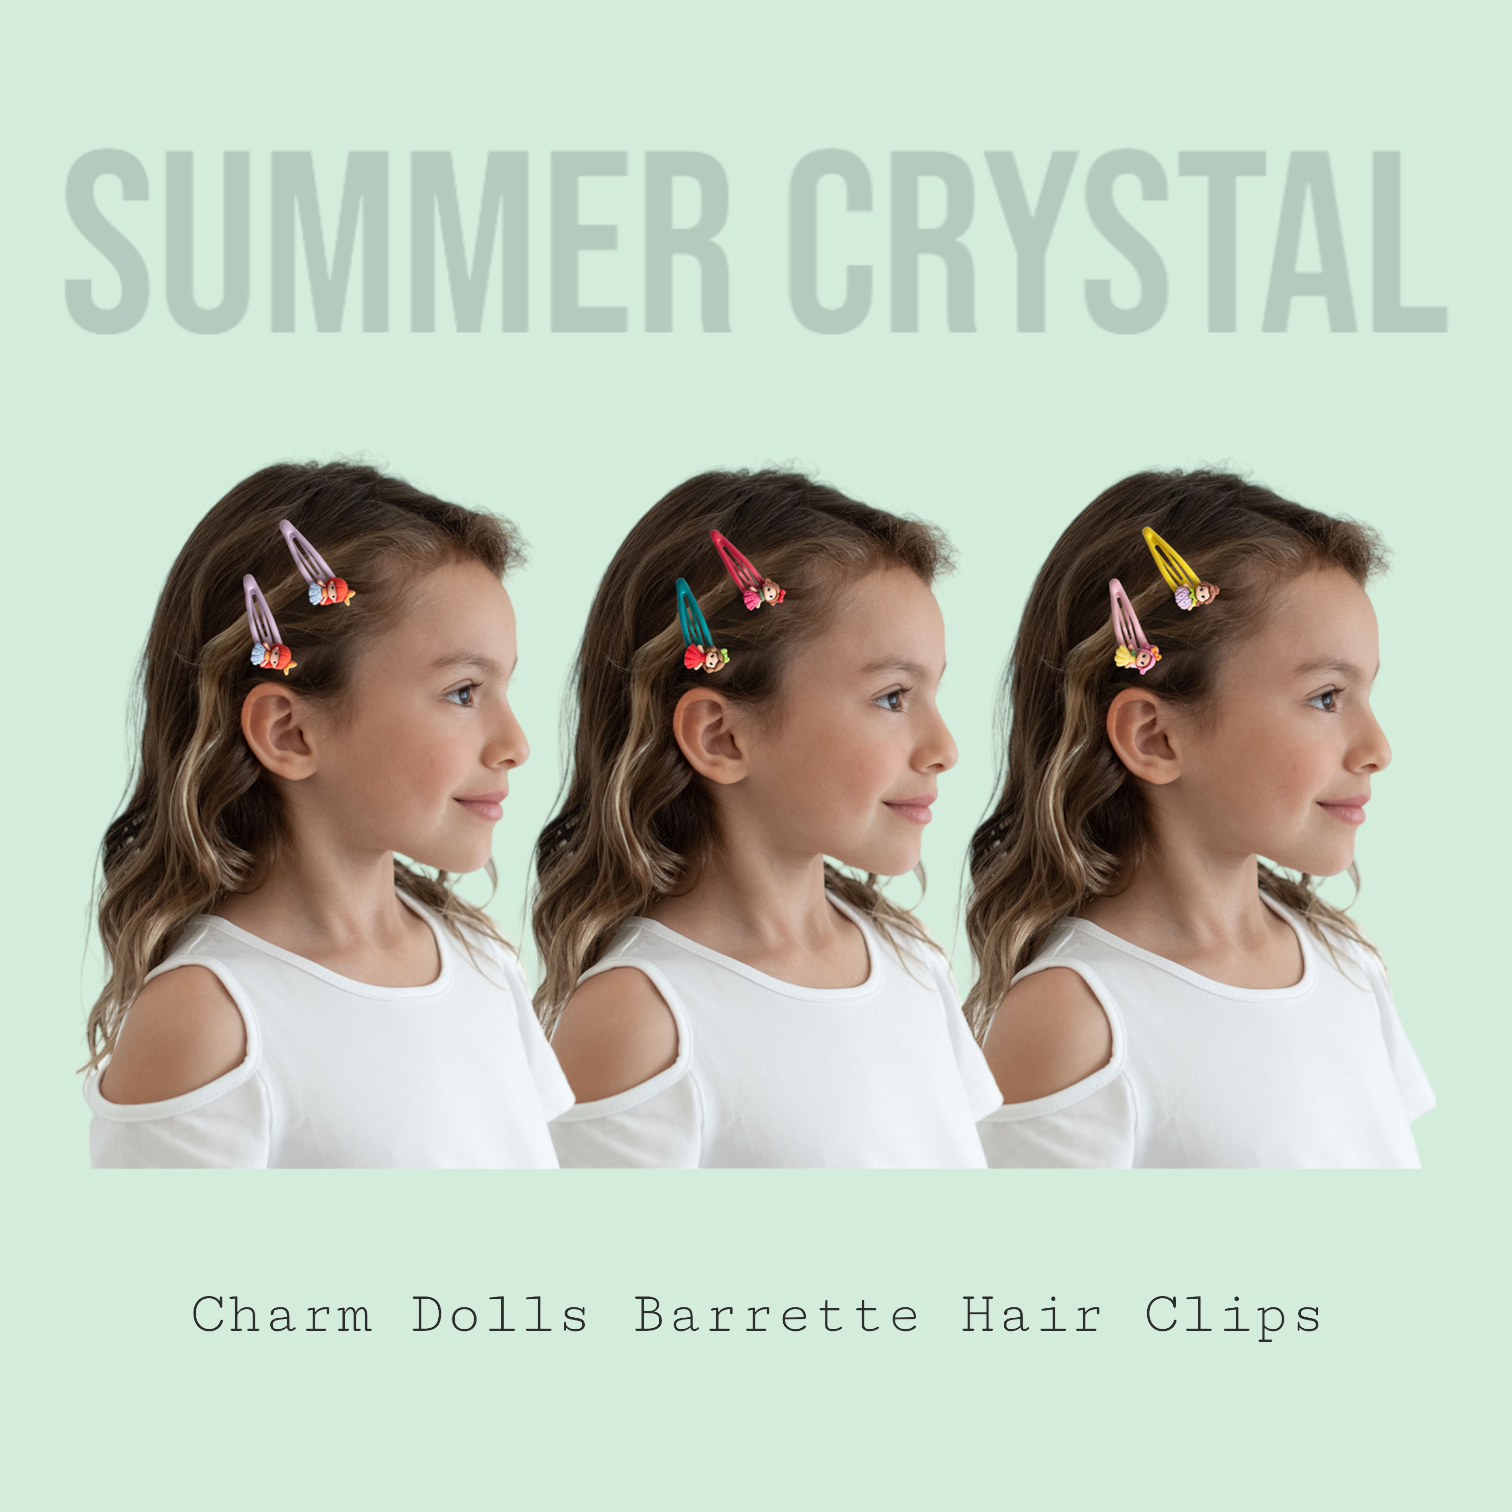 Summer Crystal 2 Inch Barrettes Metal Snap Hair Clips -Charm Dolls - Pack of 20